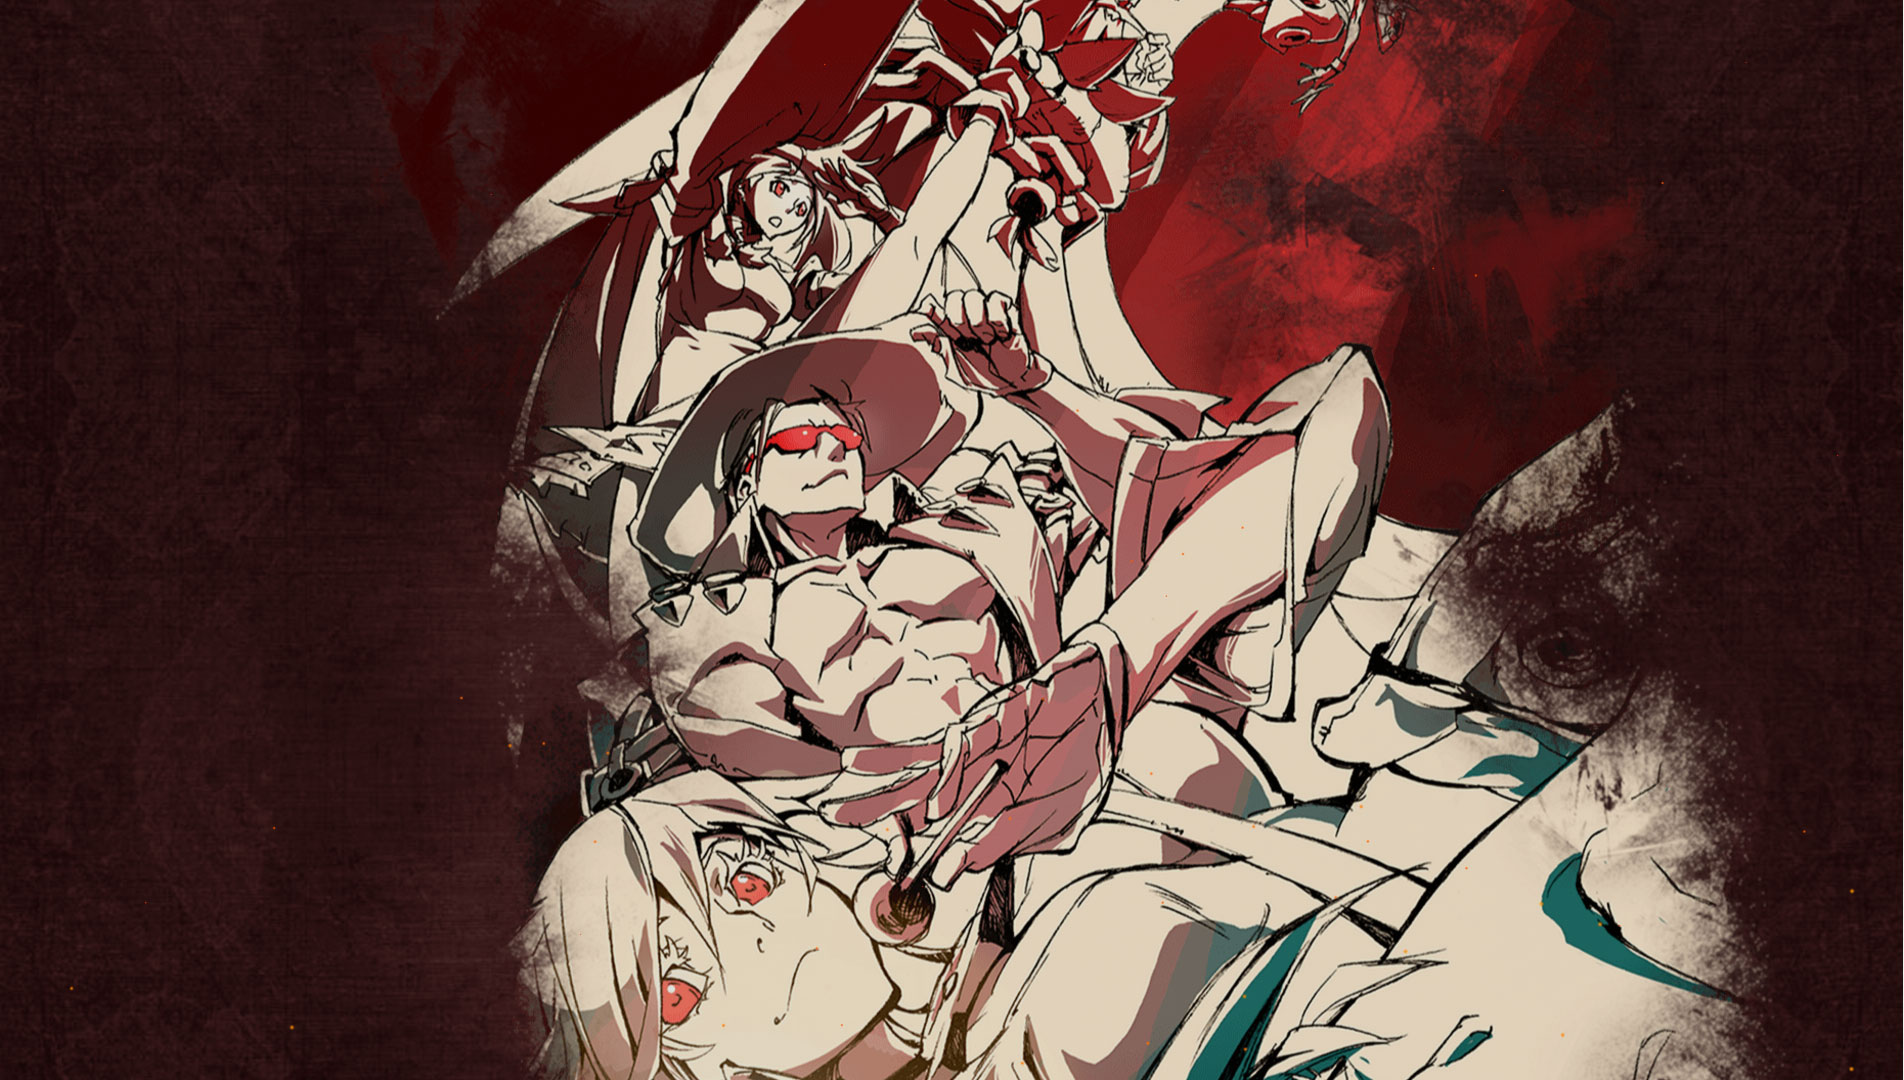 Guilty Gear Xrd Revelator Is Now Available